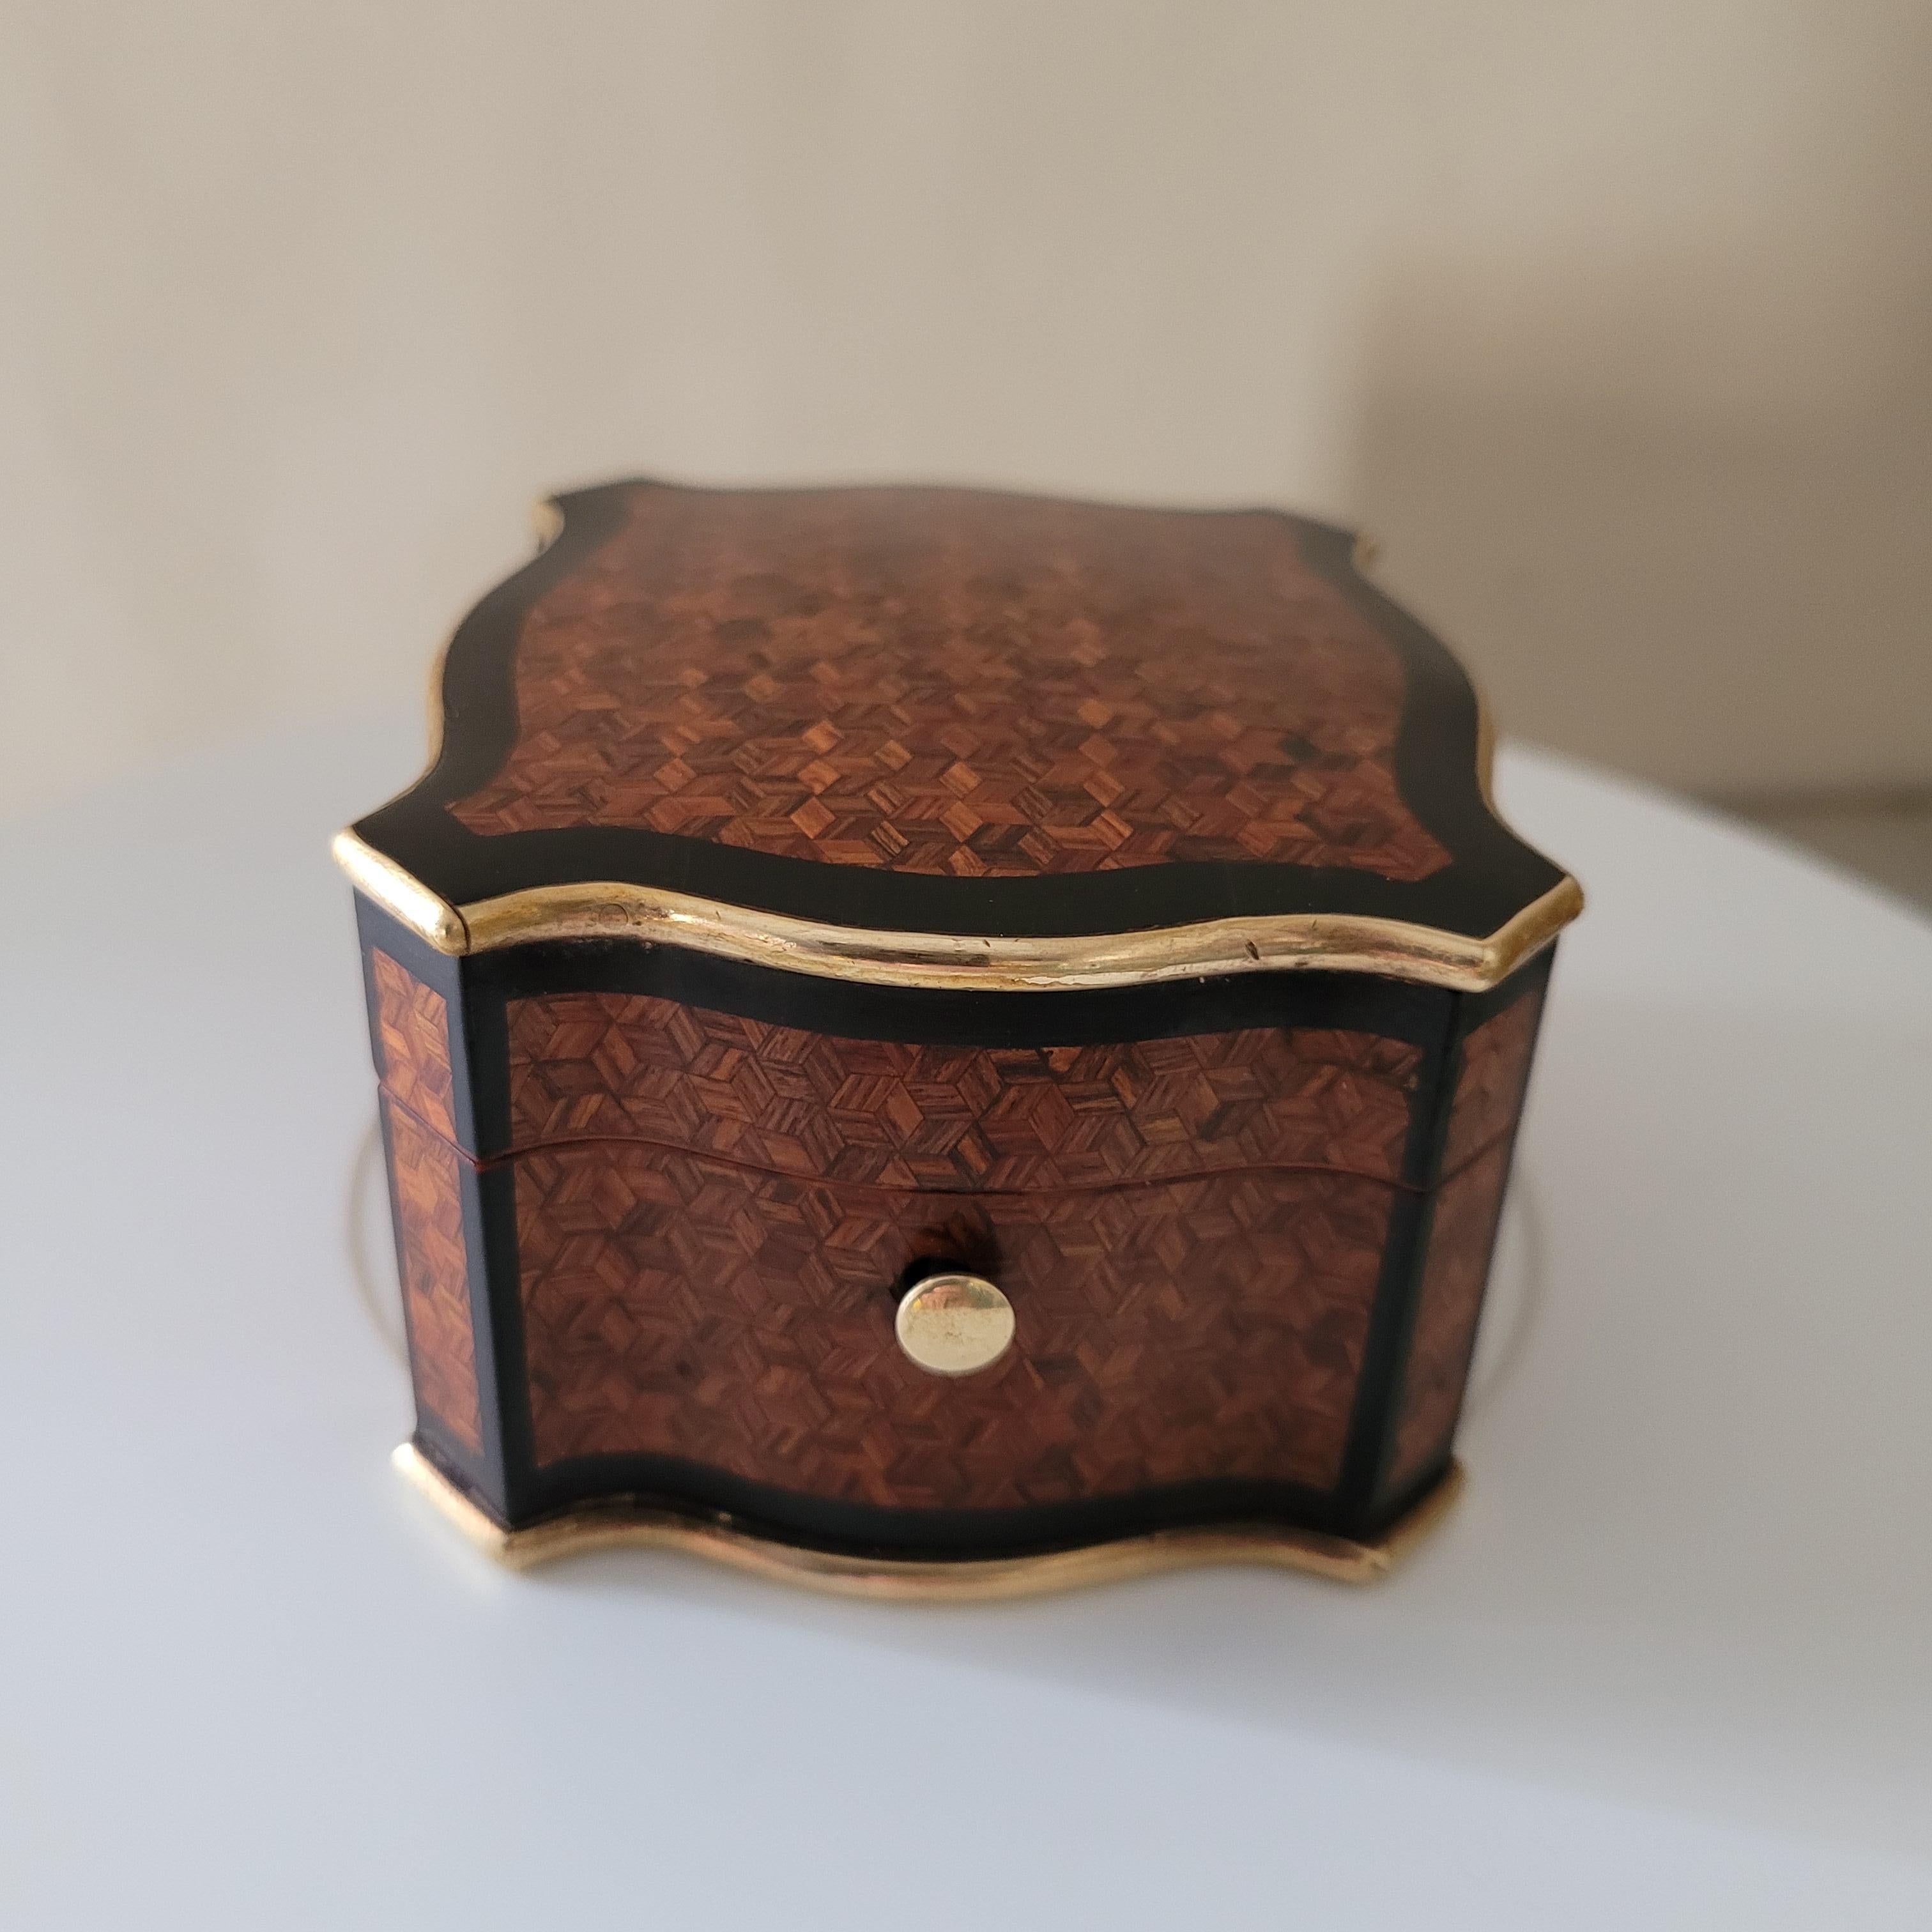 Box in precious wood marquetry, rosewood and ebony, framed in brass, for a pocket watch, called a 